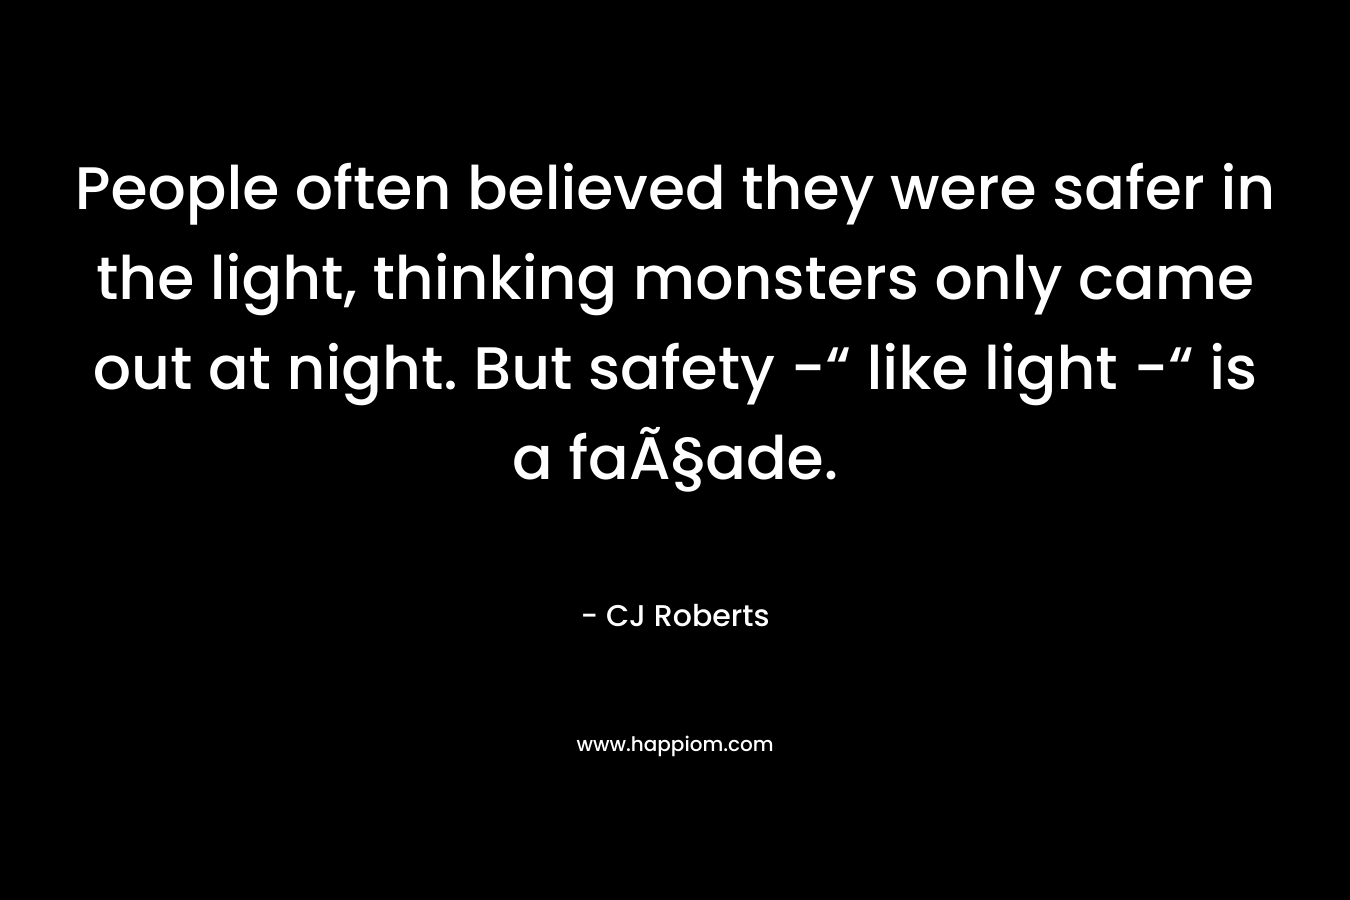 People often believed they were safer in the light, thinking monsters only came out at night. But safety -“ like light -“ is a faÃ§ade. – CJ Roberts